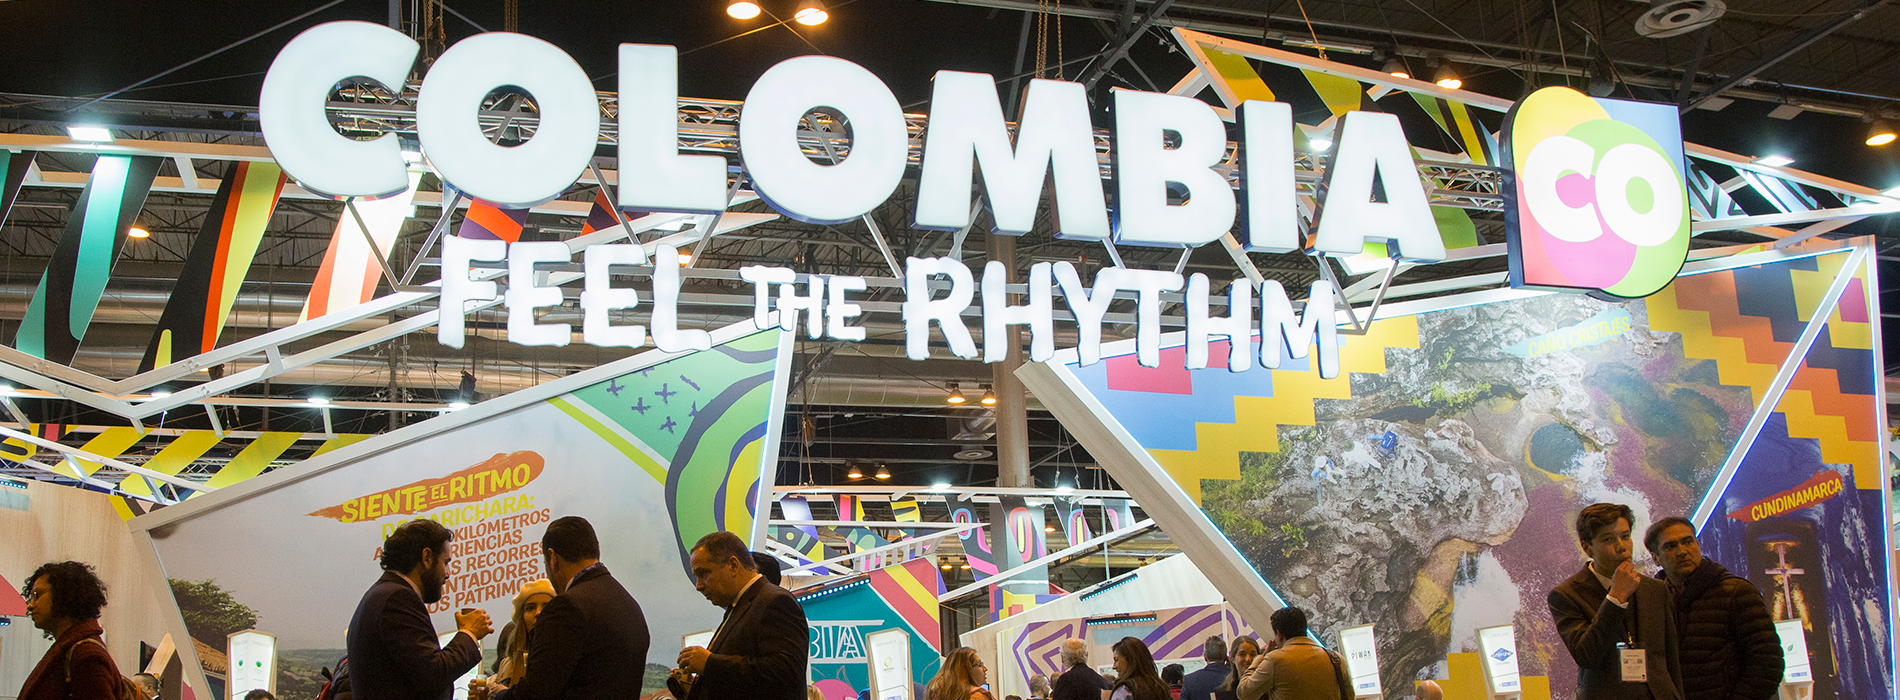 The UK will feel Colombia’s rhythm at WTM